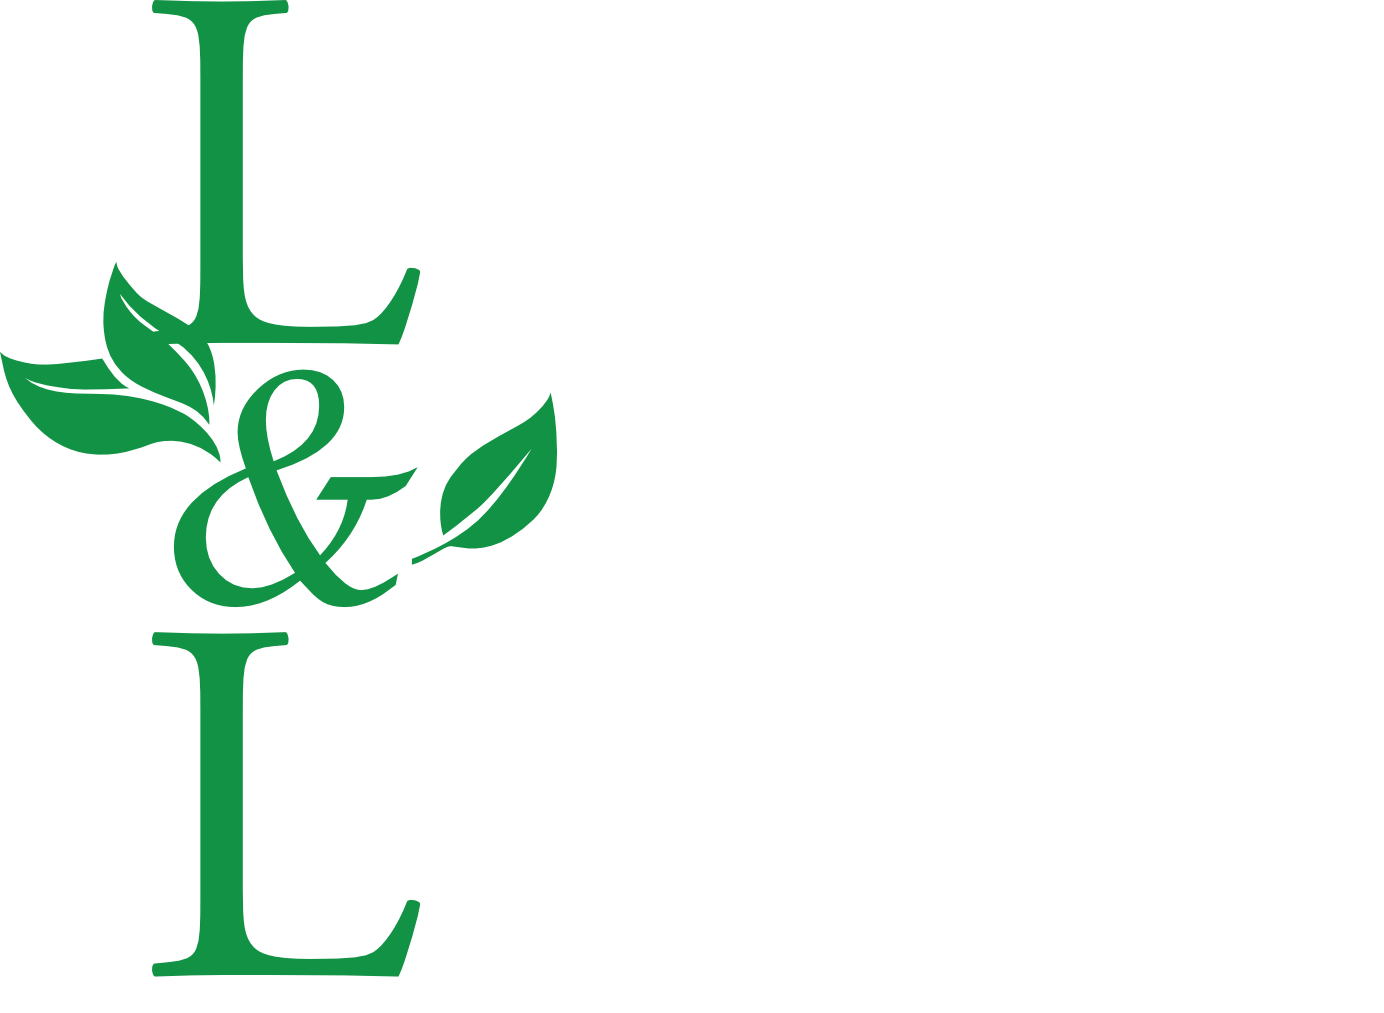 Land and Landscaping Company logo